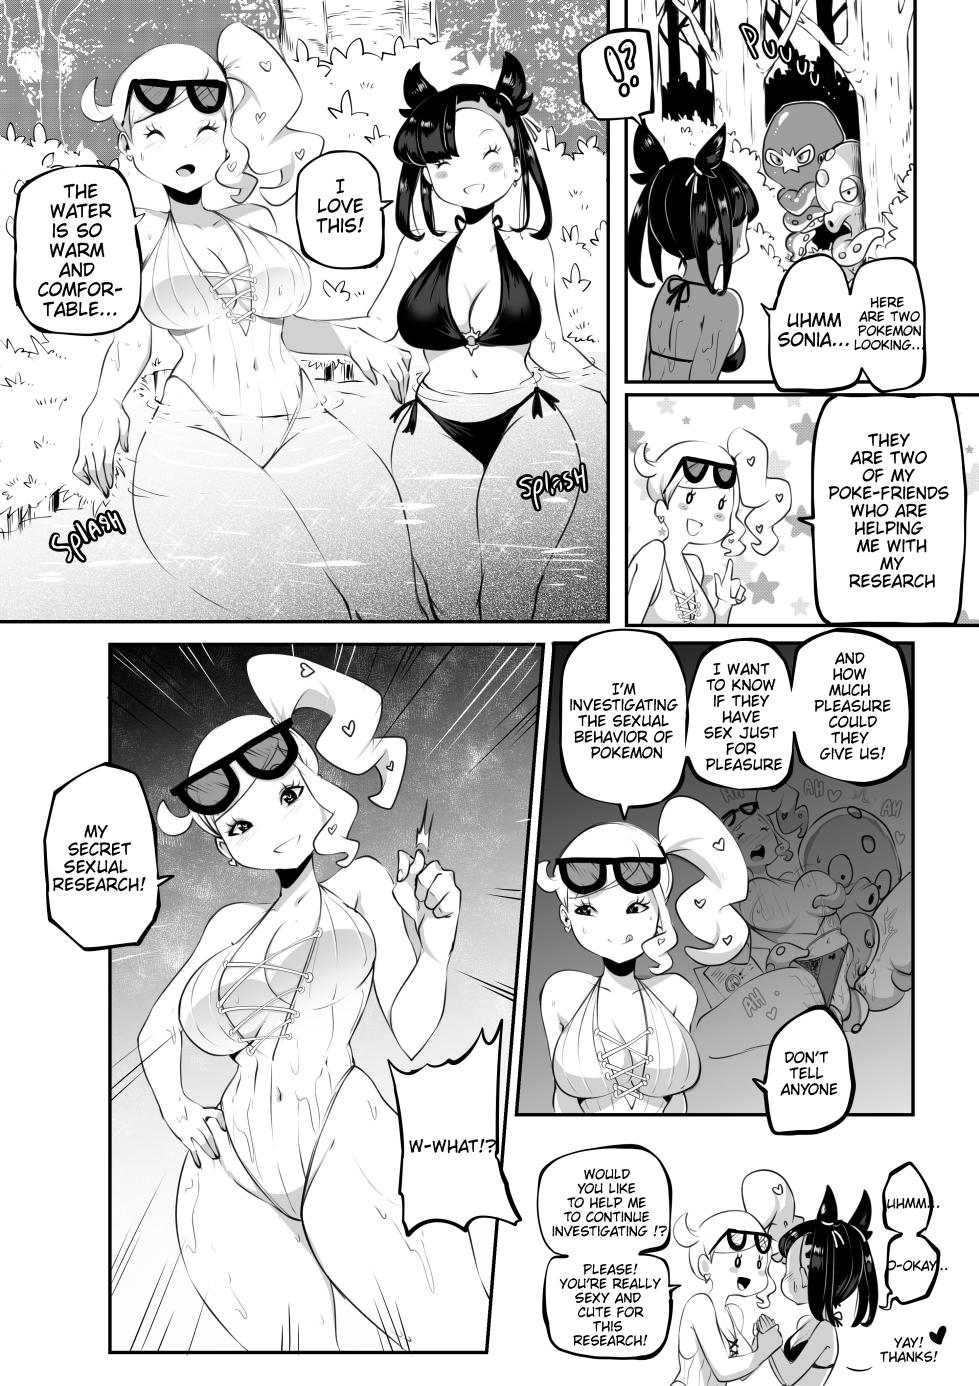 [Kenron Toqueen] Secret Research (Pokémon Sword and Shield) - Page 6